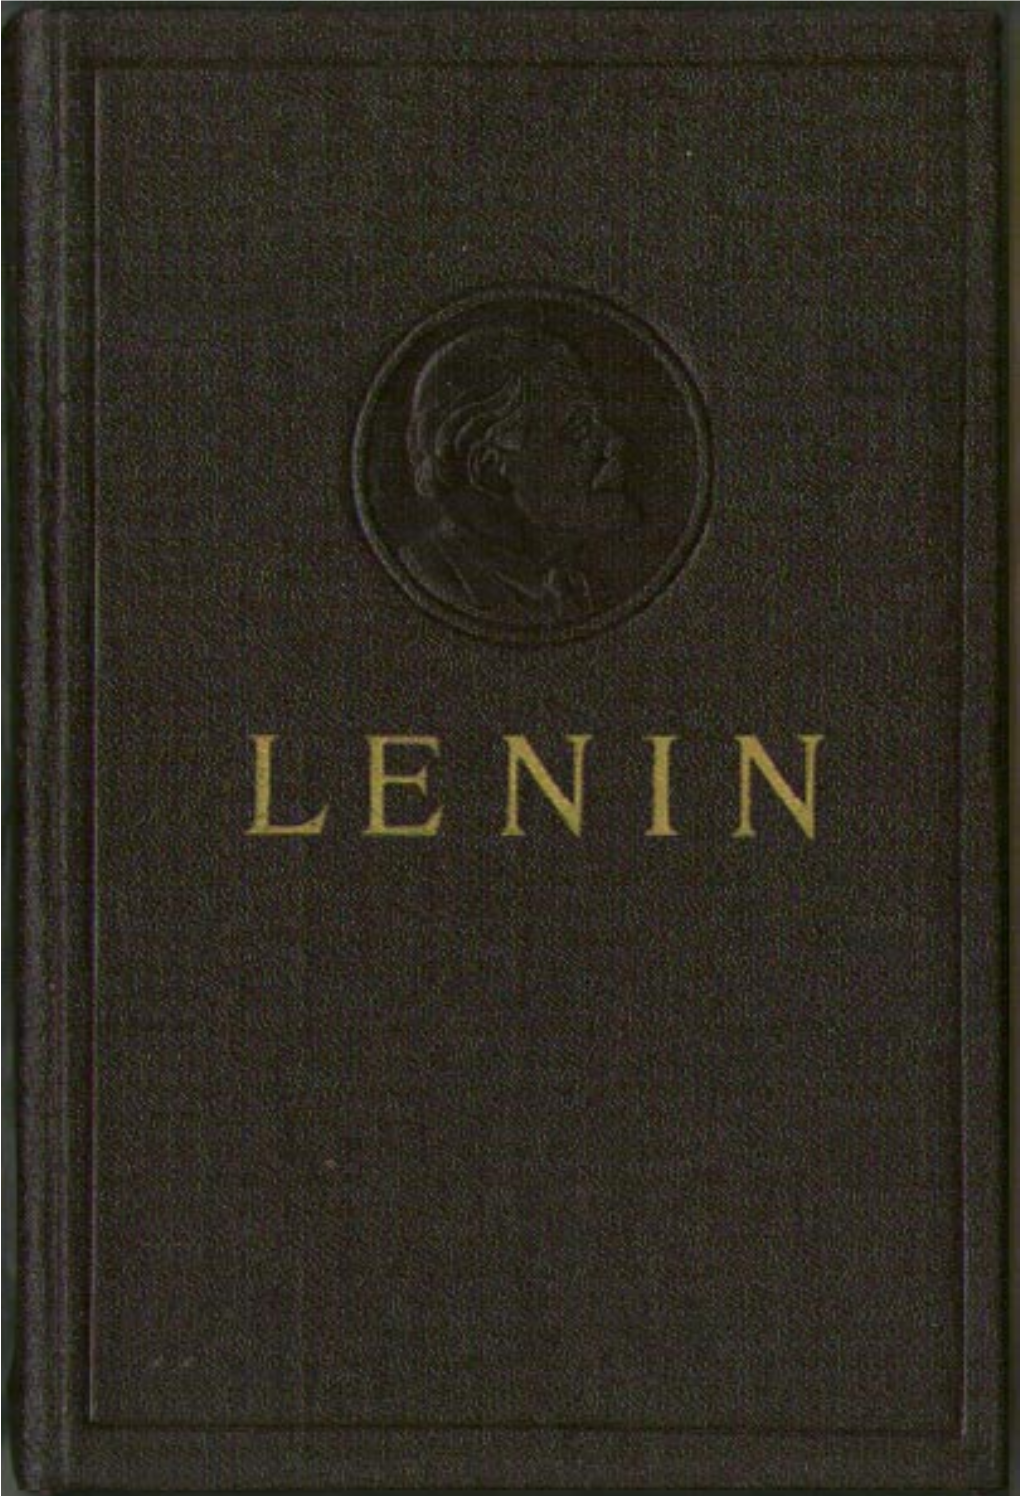 Collected Works of VI Lenin